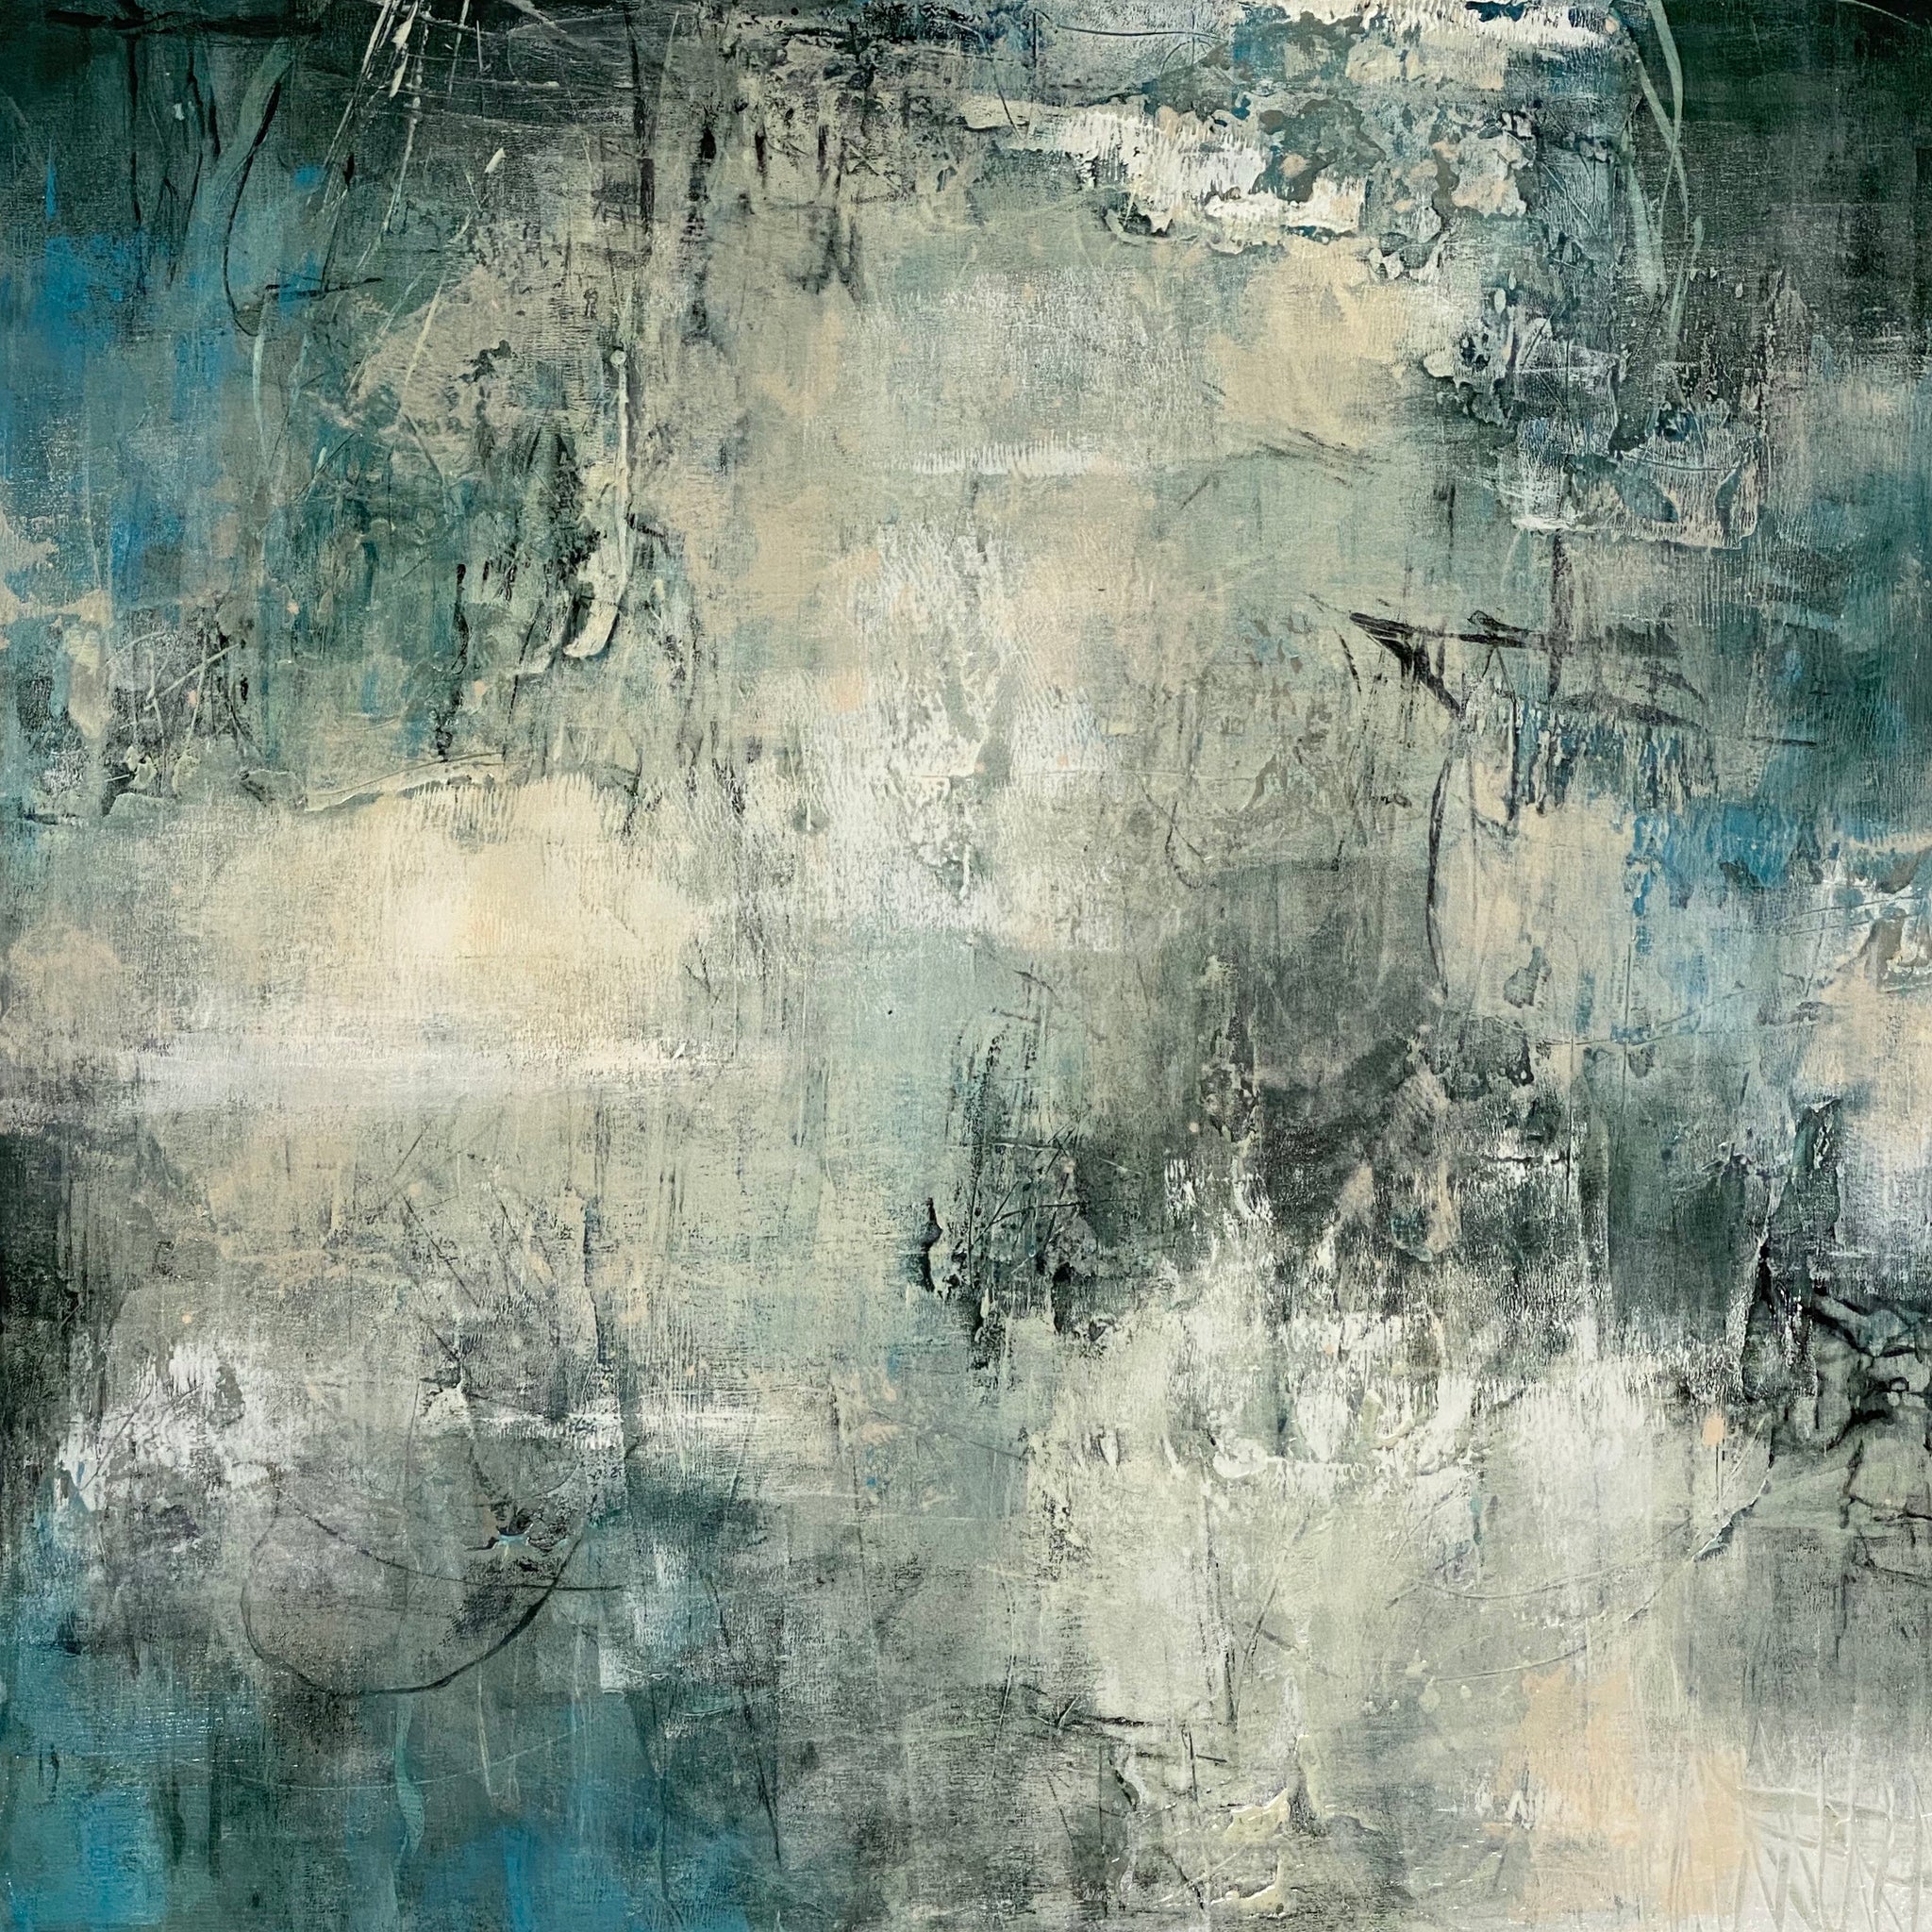 Juanita Bellavance, Depth and duration, 2020, Acrylic on canvas, 24 x 24 inches